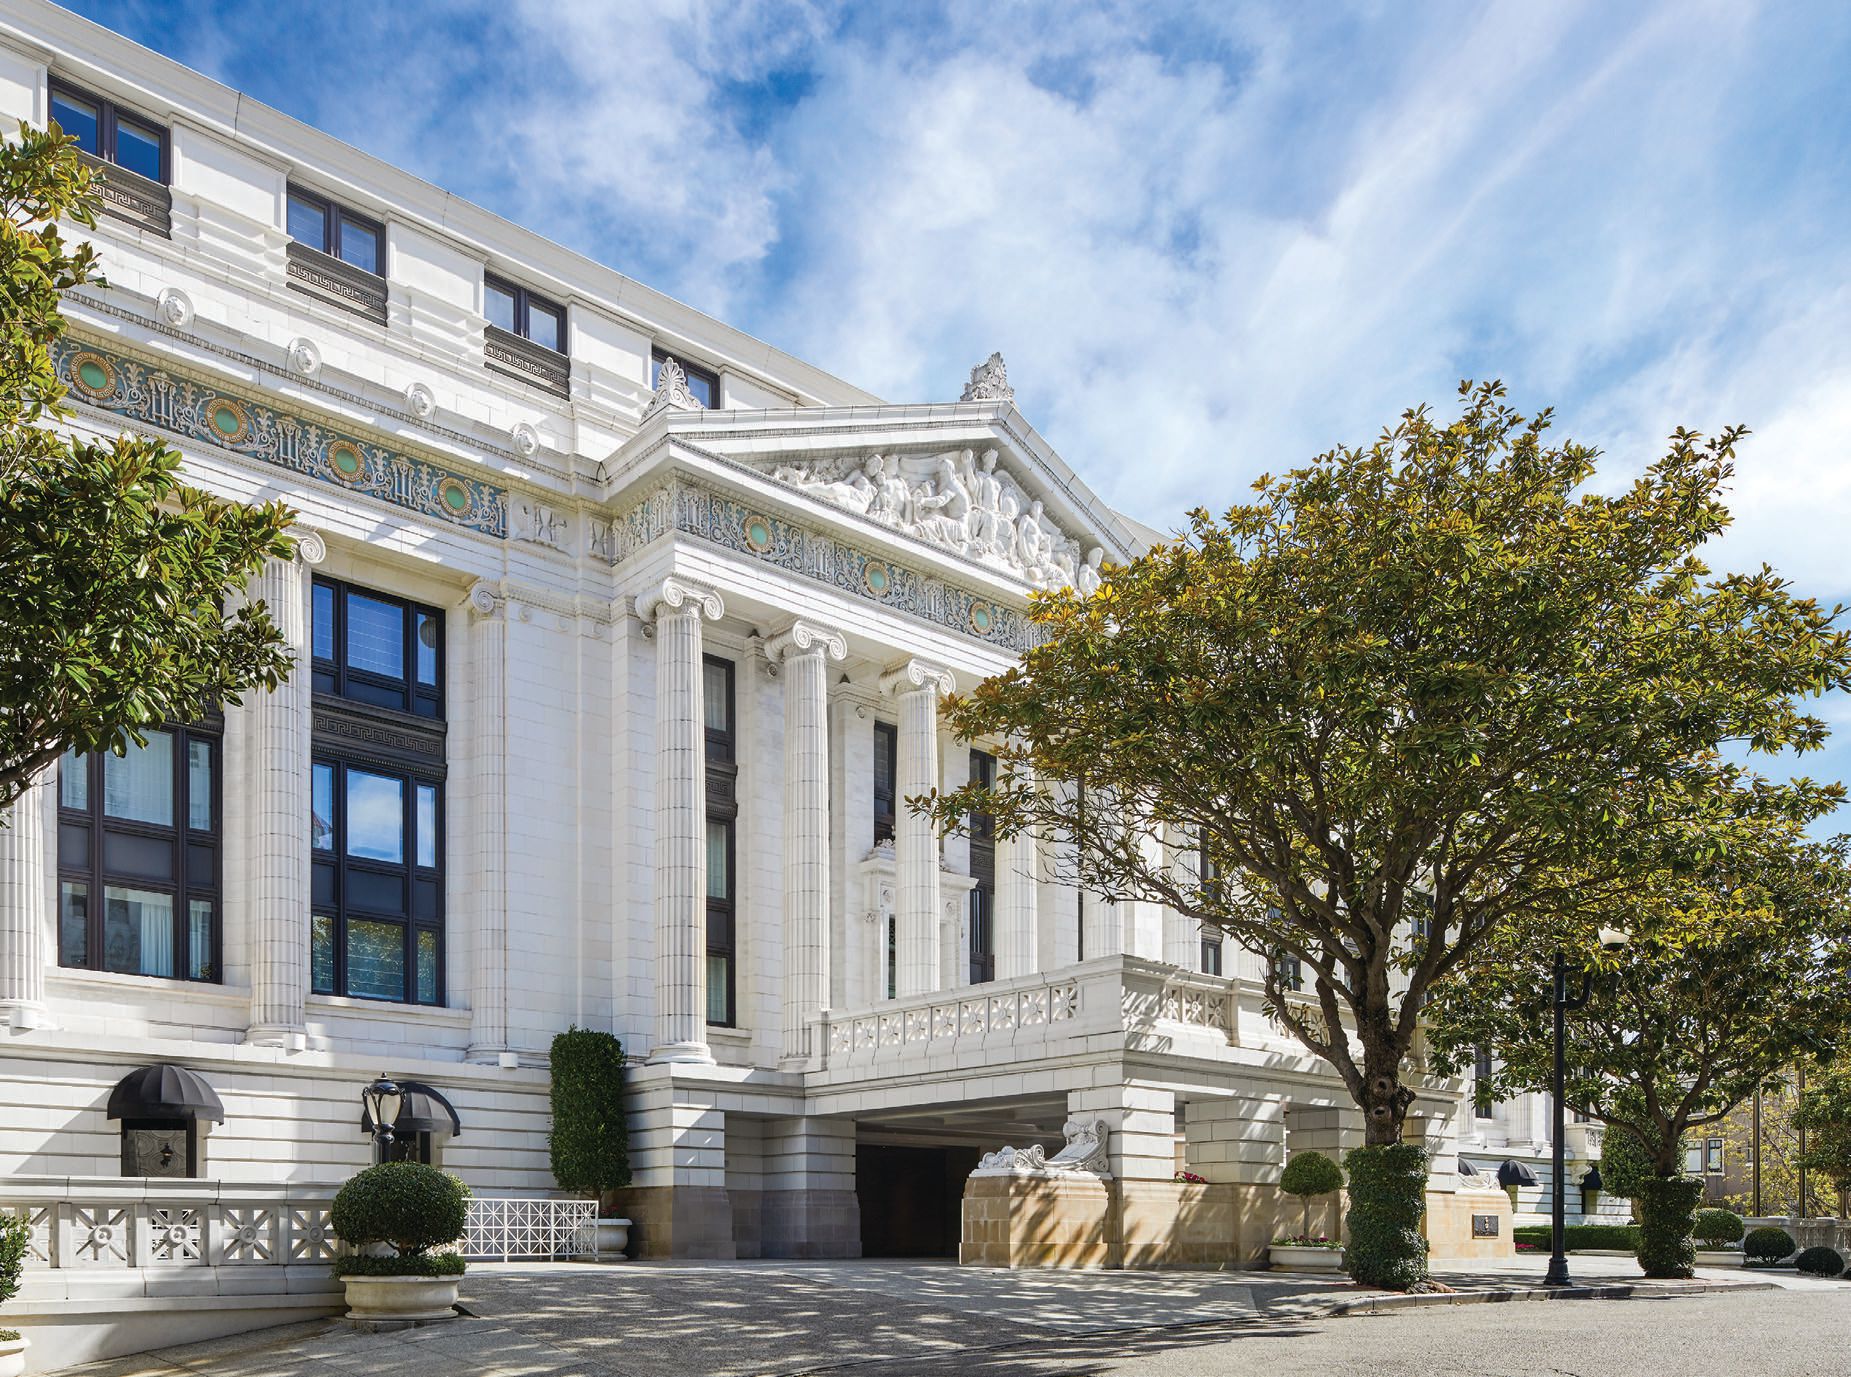 The Ritz-Carlton, San Francisco resides inside a historic 1909 property on Nob Hill. It was originally designed by Napoleon LeBrun and Sons. PHOTO COURTESY OF THE RITZ-CARLTON, SAN FRANCISCO